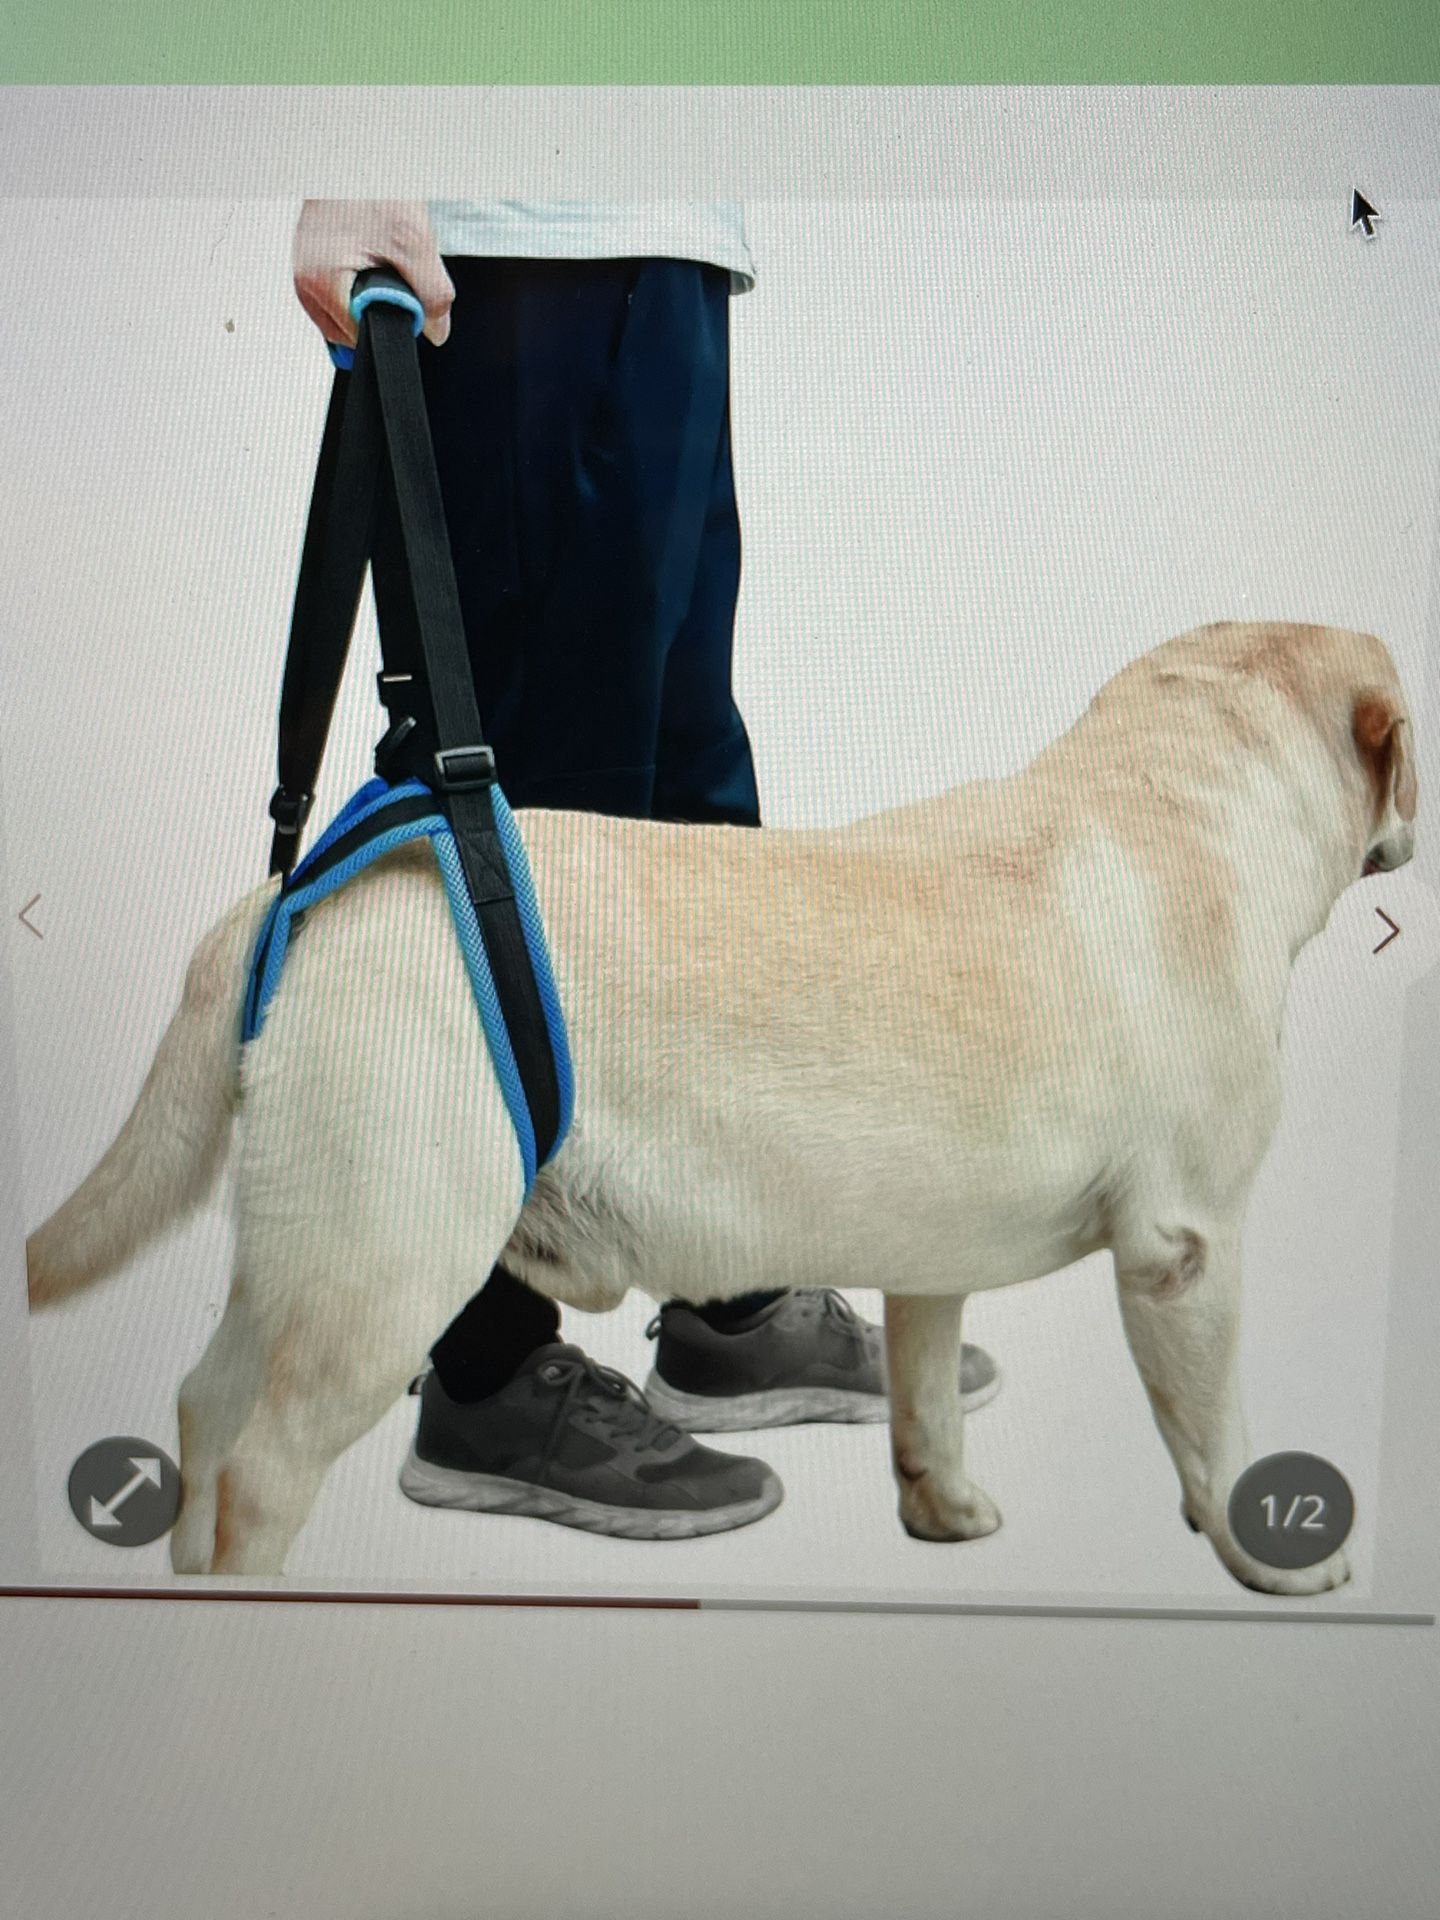 Dog Rear End Support Harness